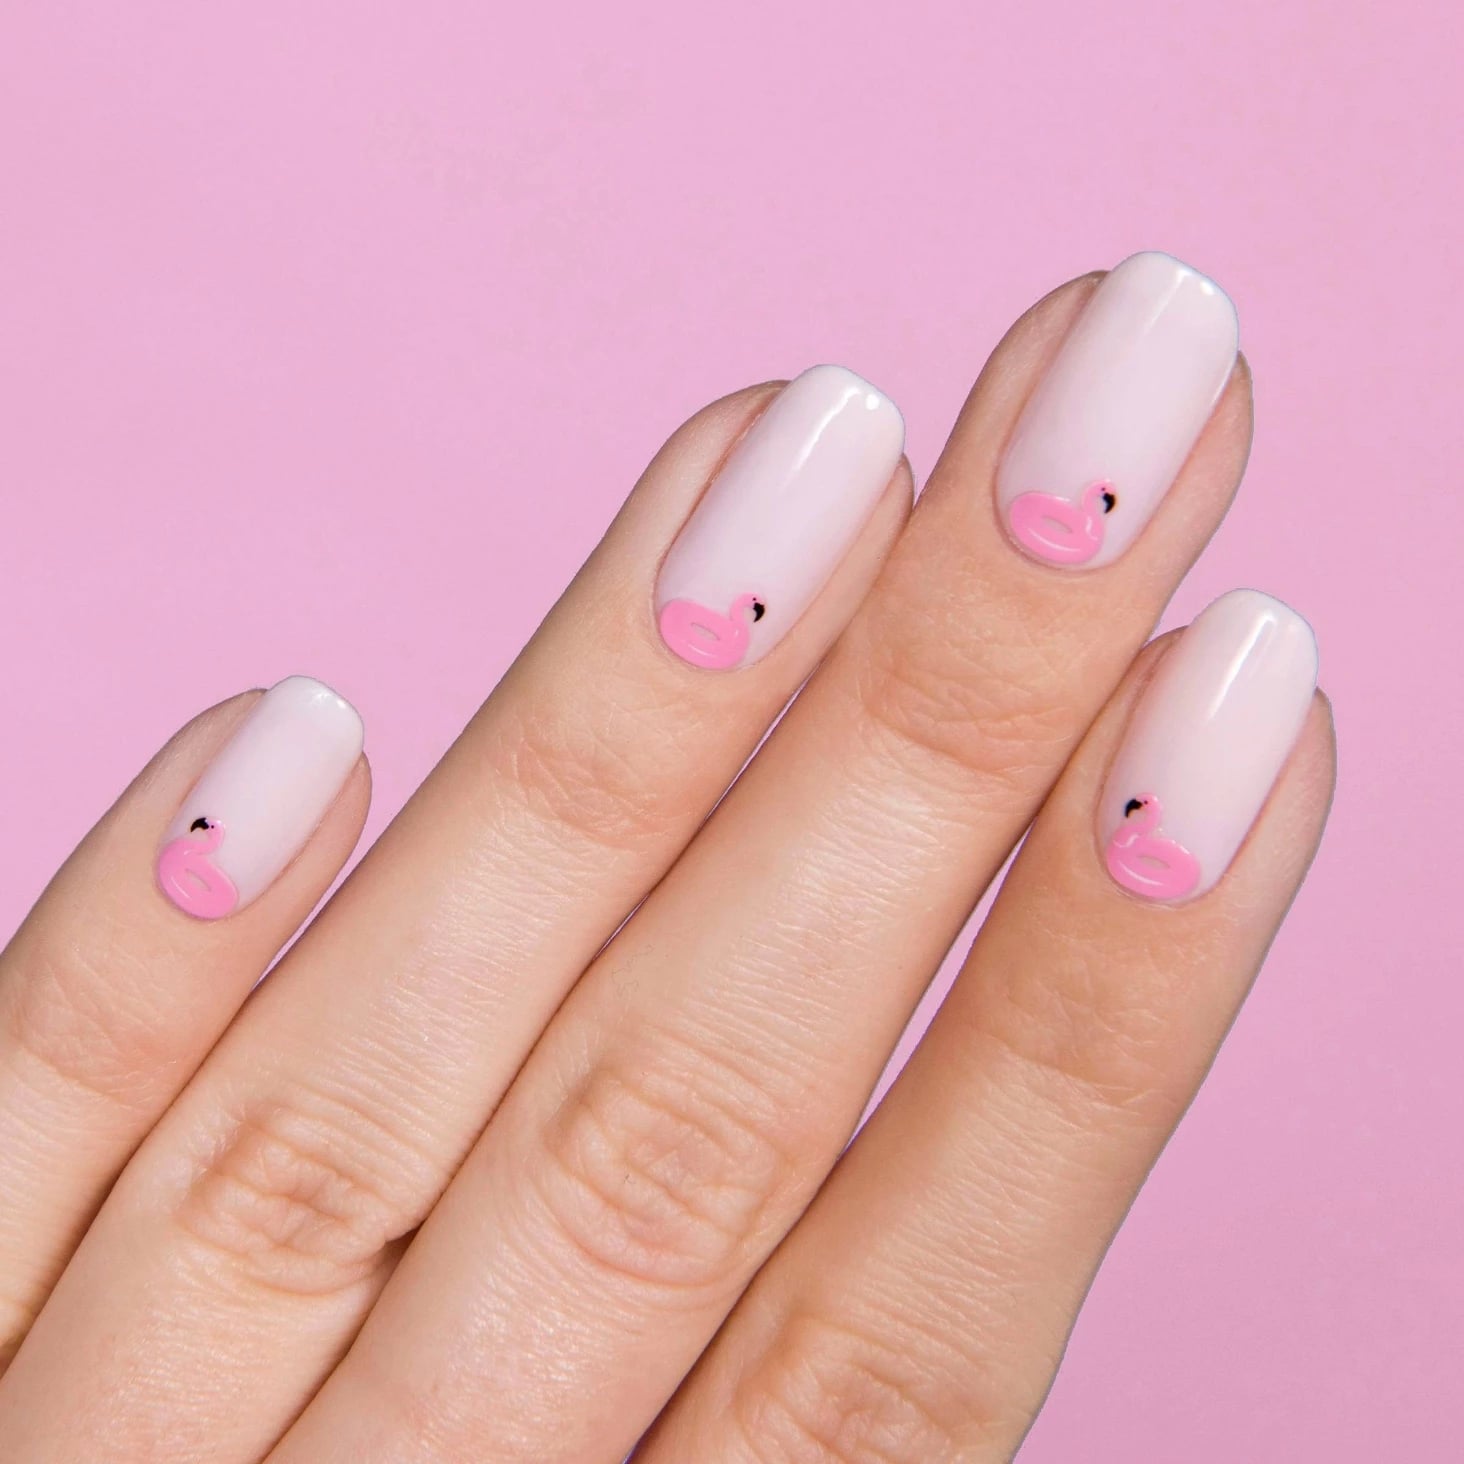 The Founder of Olive & June on Nail Art and French Manicures